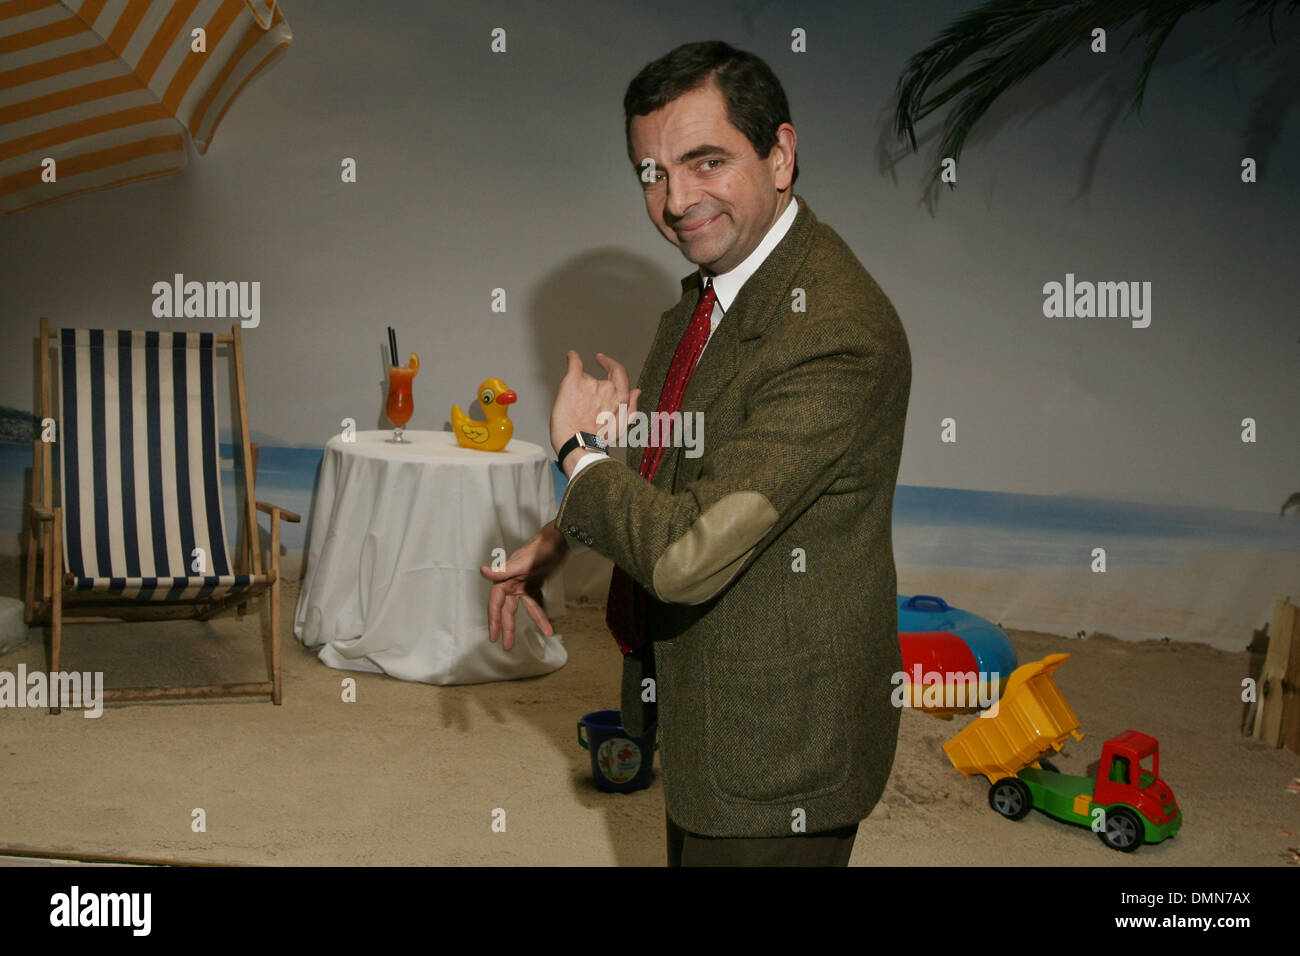 Rowan Atkinson at the photocall of his new Mr. Bean film 'Mr. Bean's Holiday' in Berlin. Stock Photo